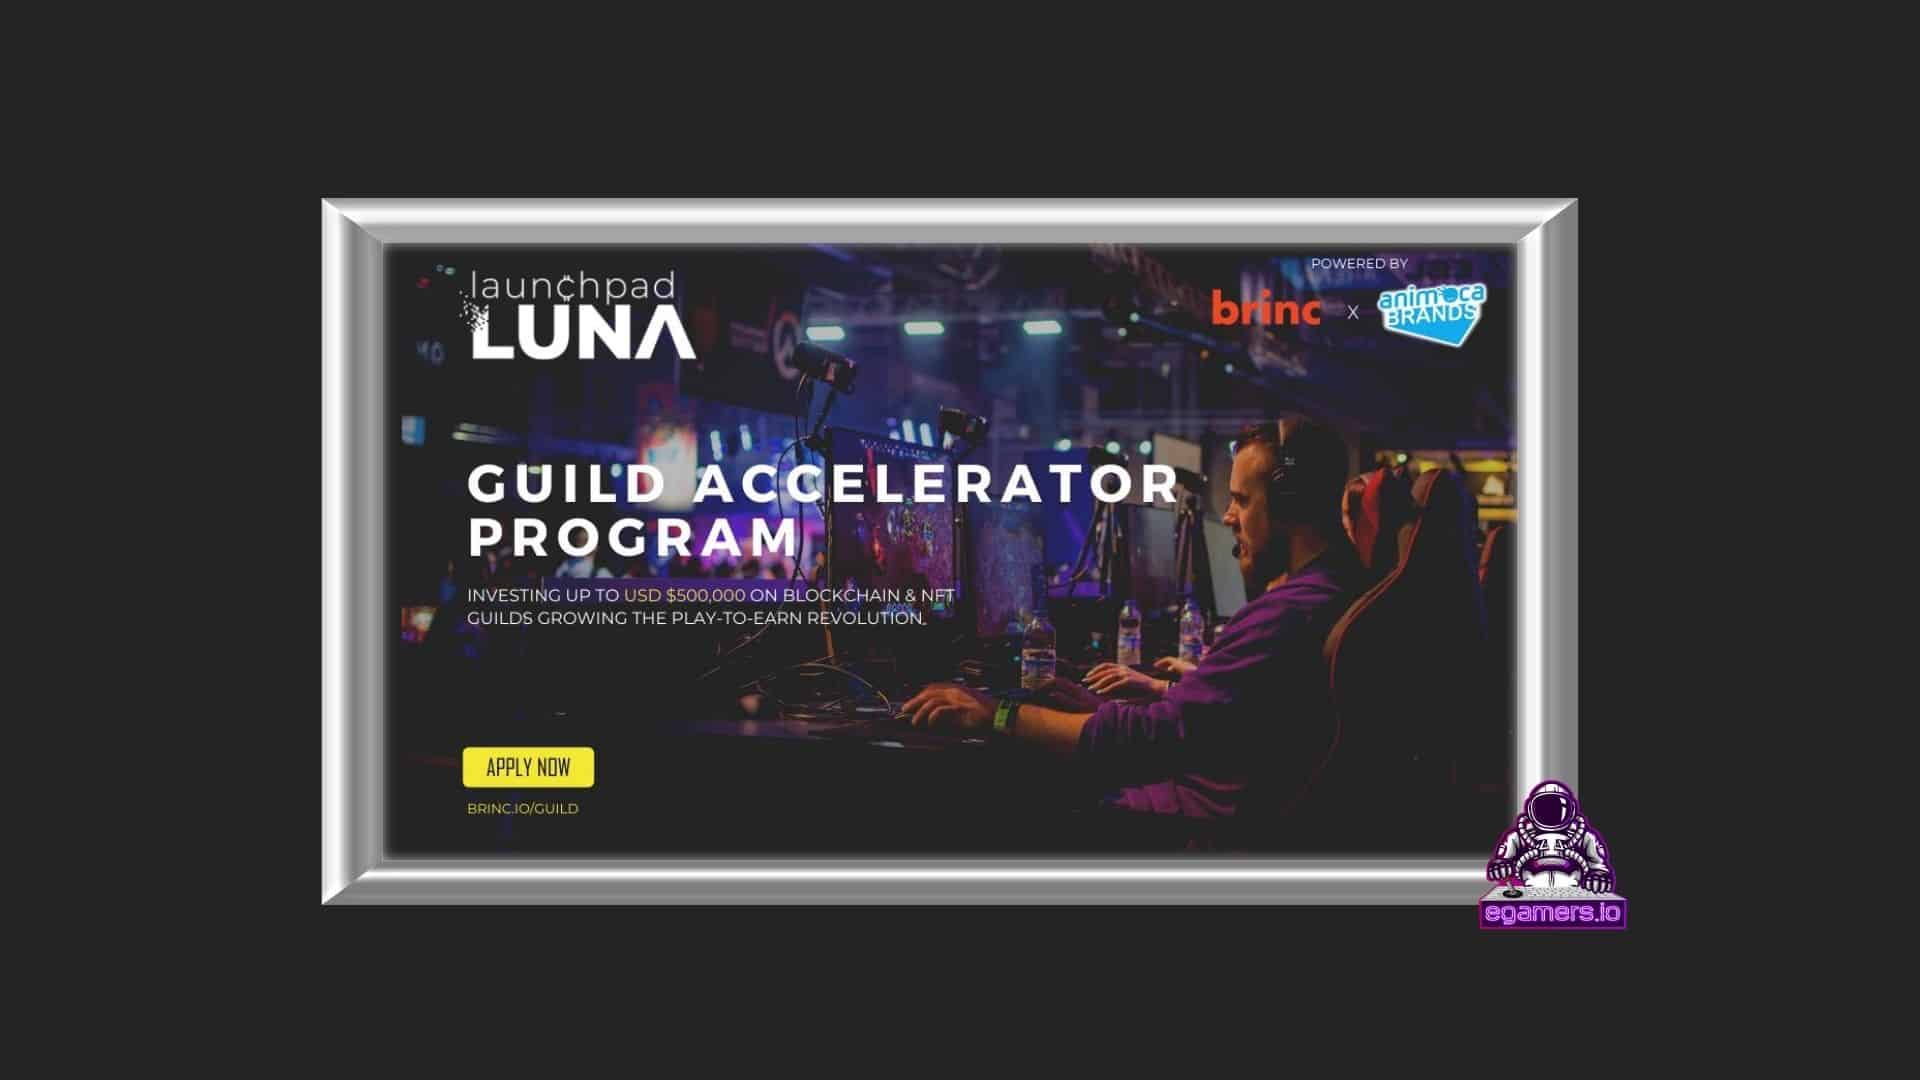 Animoca Brands and Brinc launch new USM Guild Accelerator Program to bolster global play-to-earn guild ecosystem